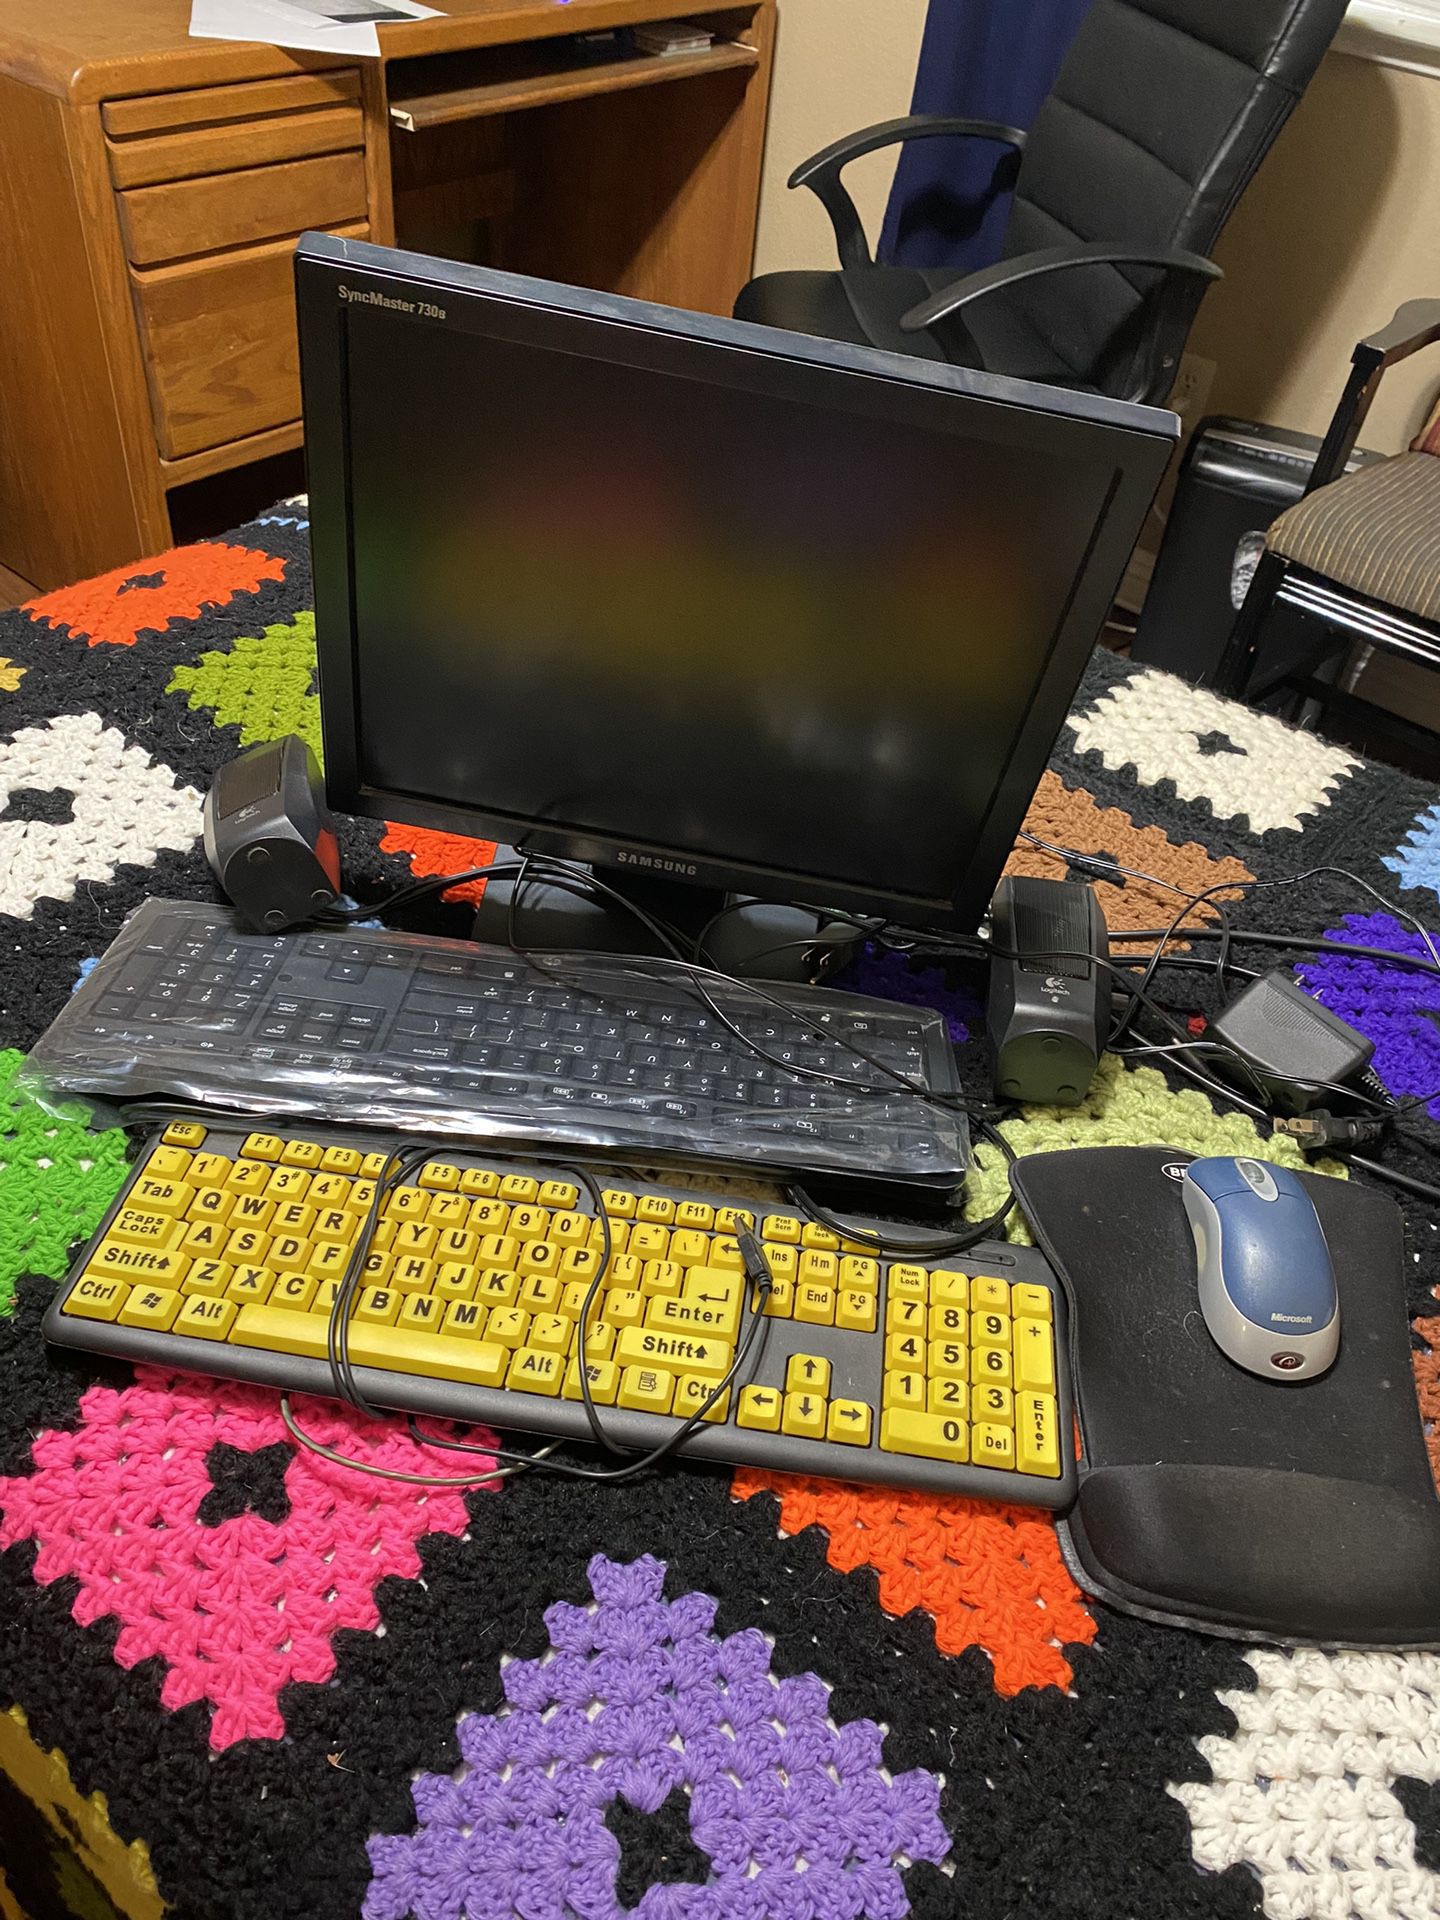 Computer Monitor, Mouse, 2 Keyboards, Speakers